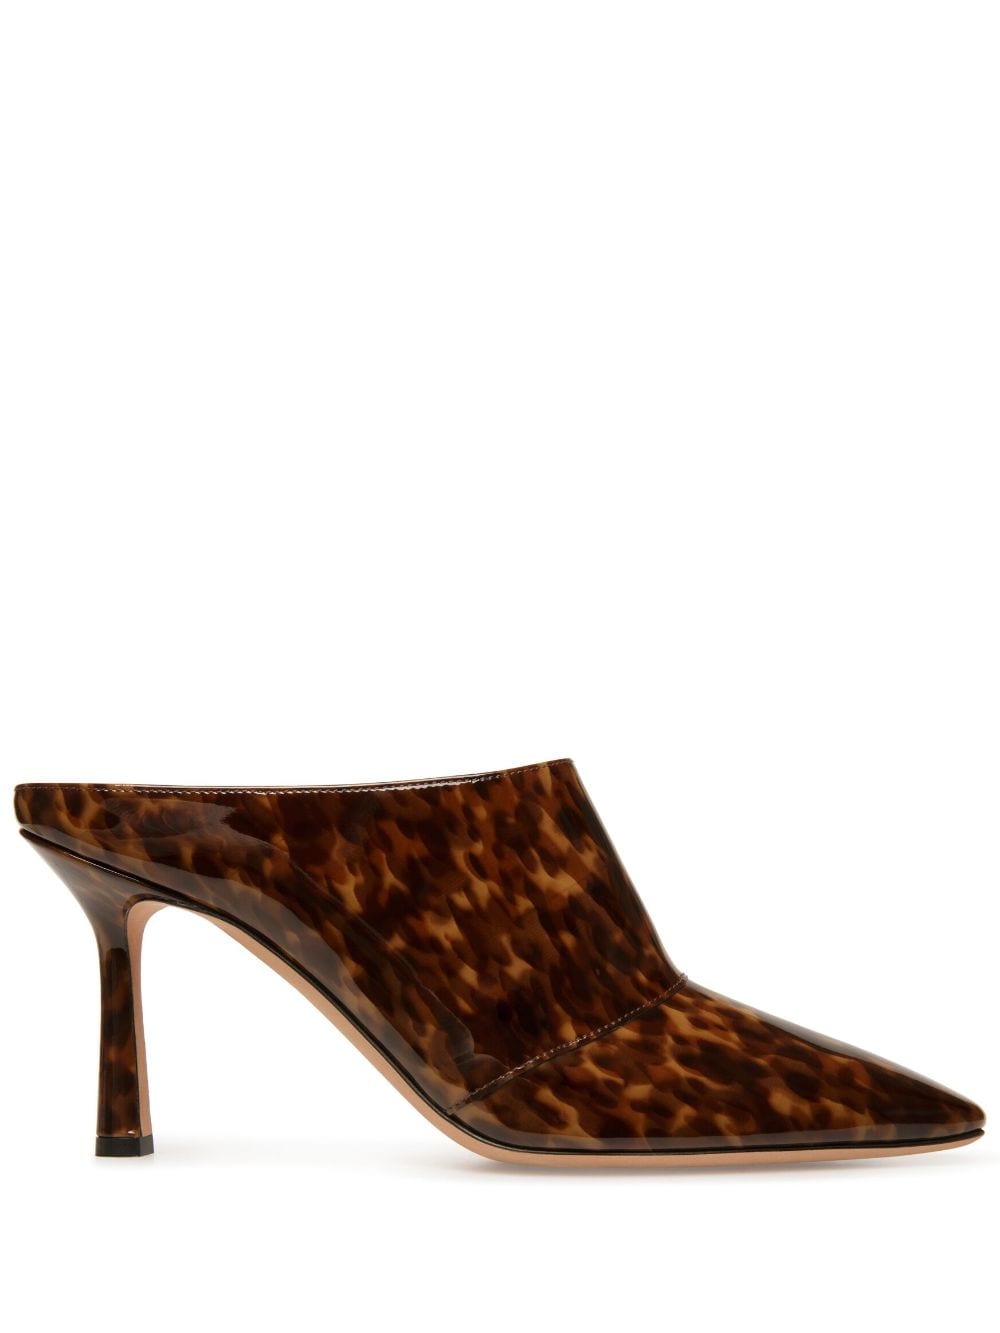 Bally Nadine 85mm patent leather pumps - Brown